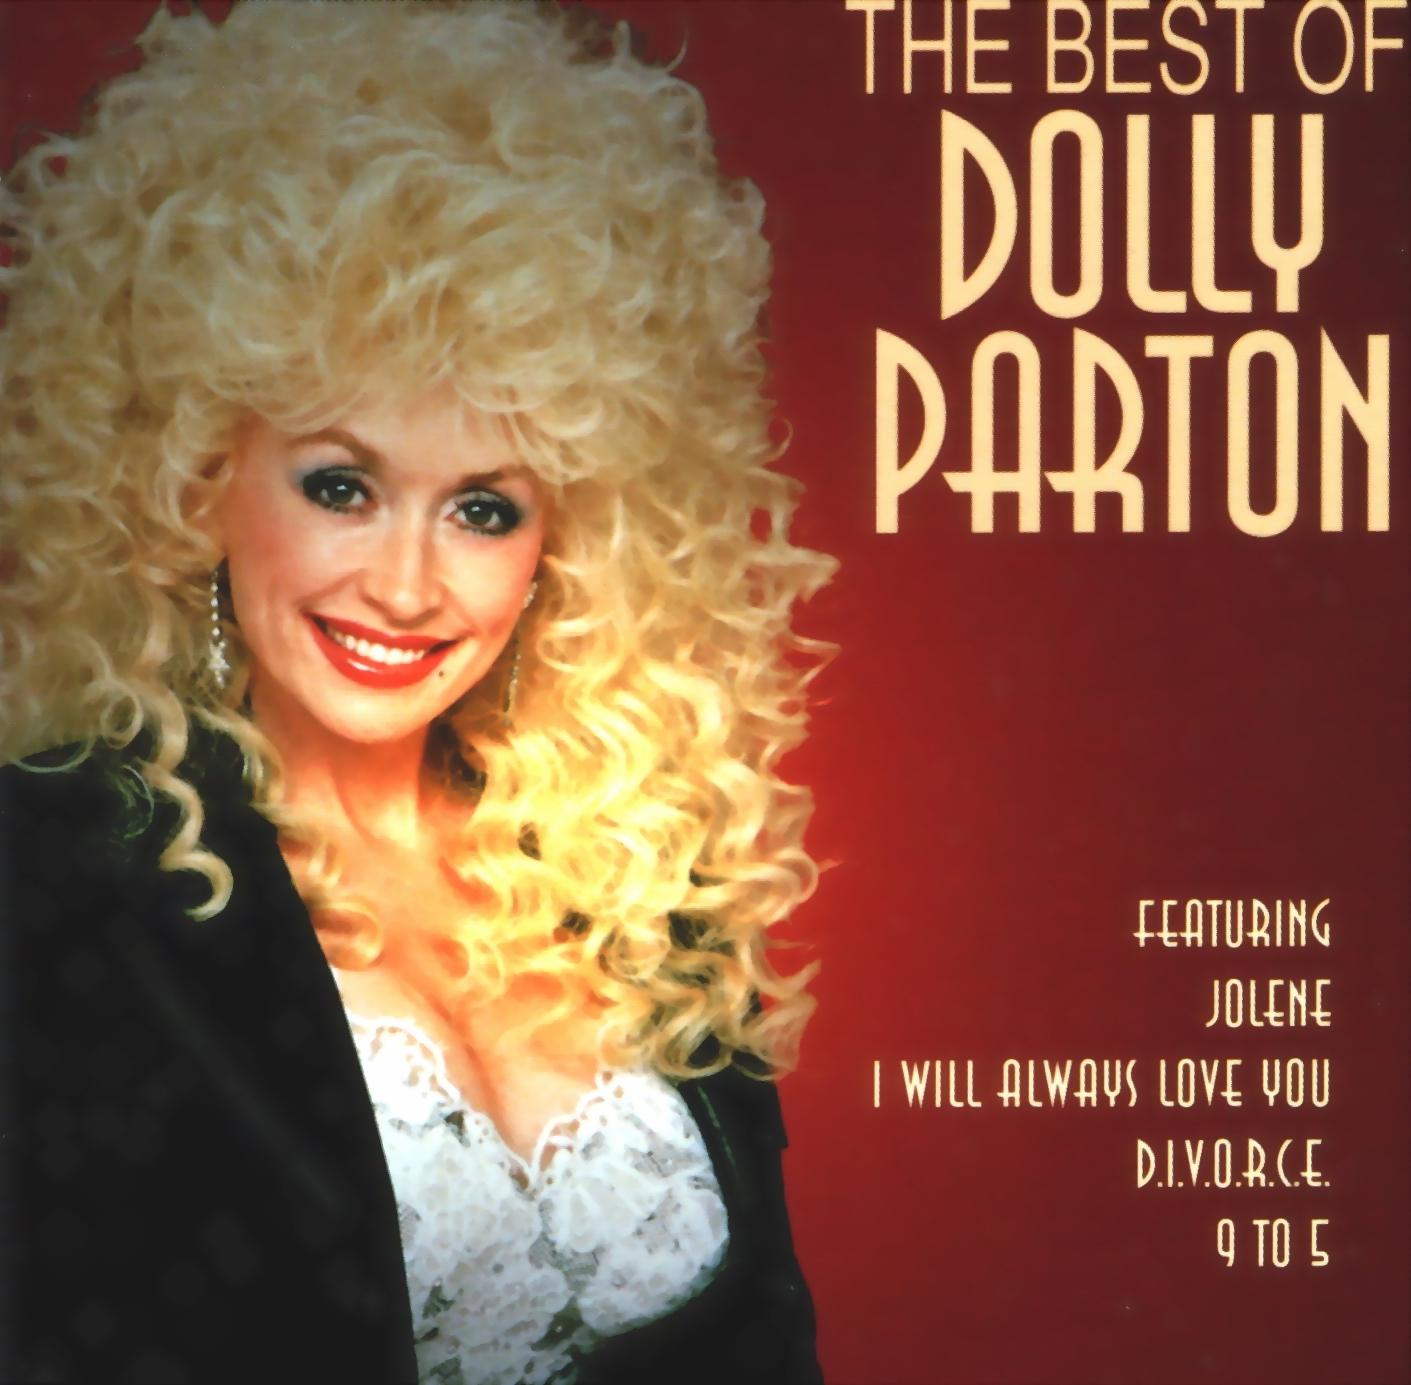 COVERS.BOX.SK ::: dolly parton - the best of dolly parton - high quality DVD / Blueray ...